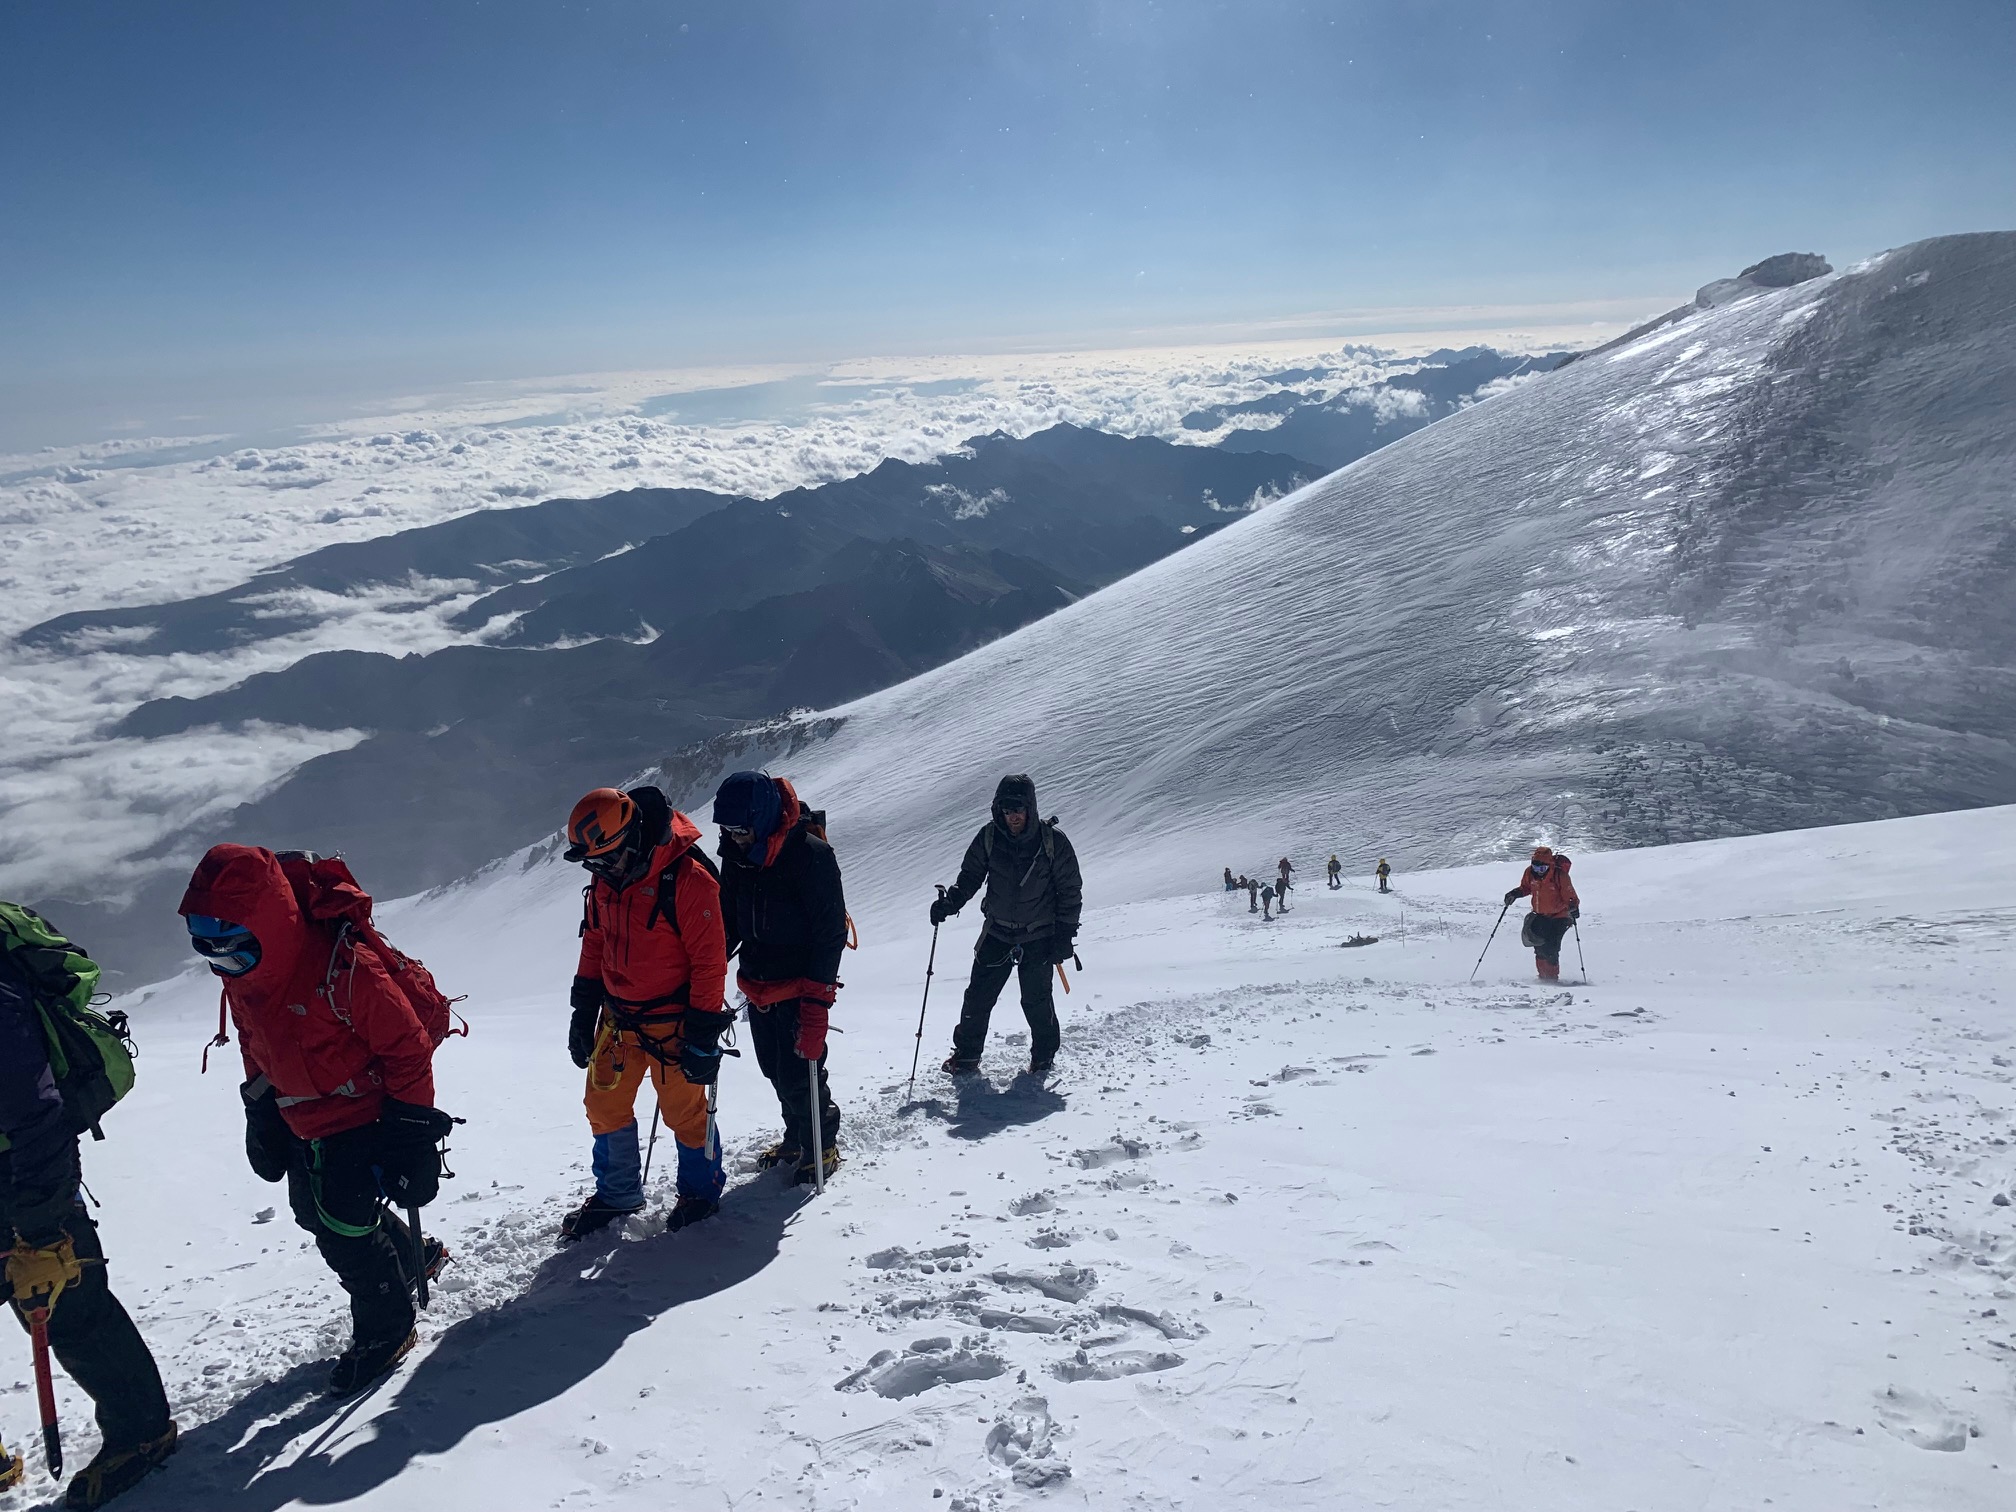 Close to the summit of Elbrus